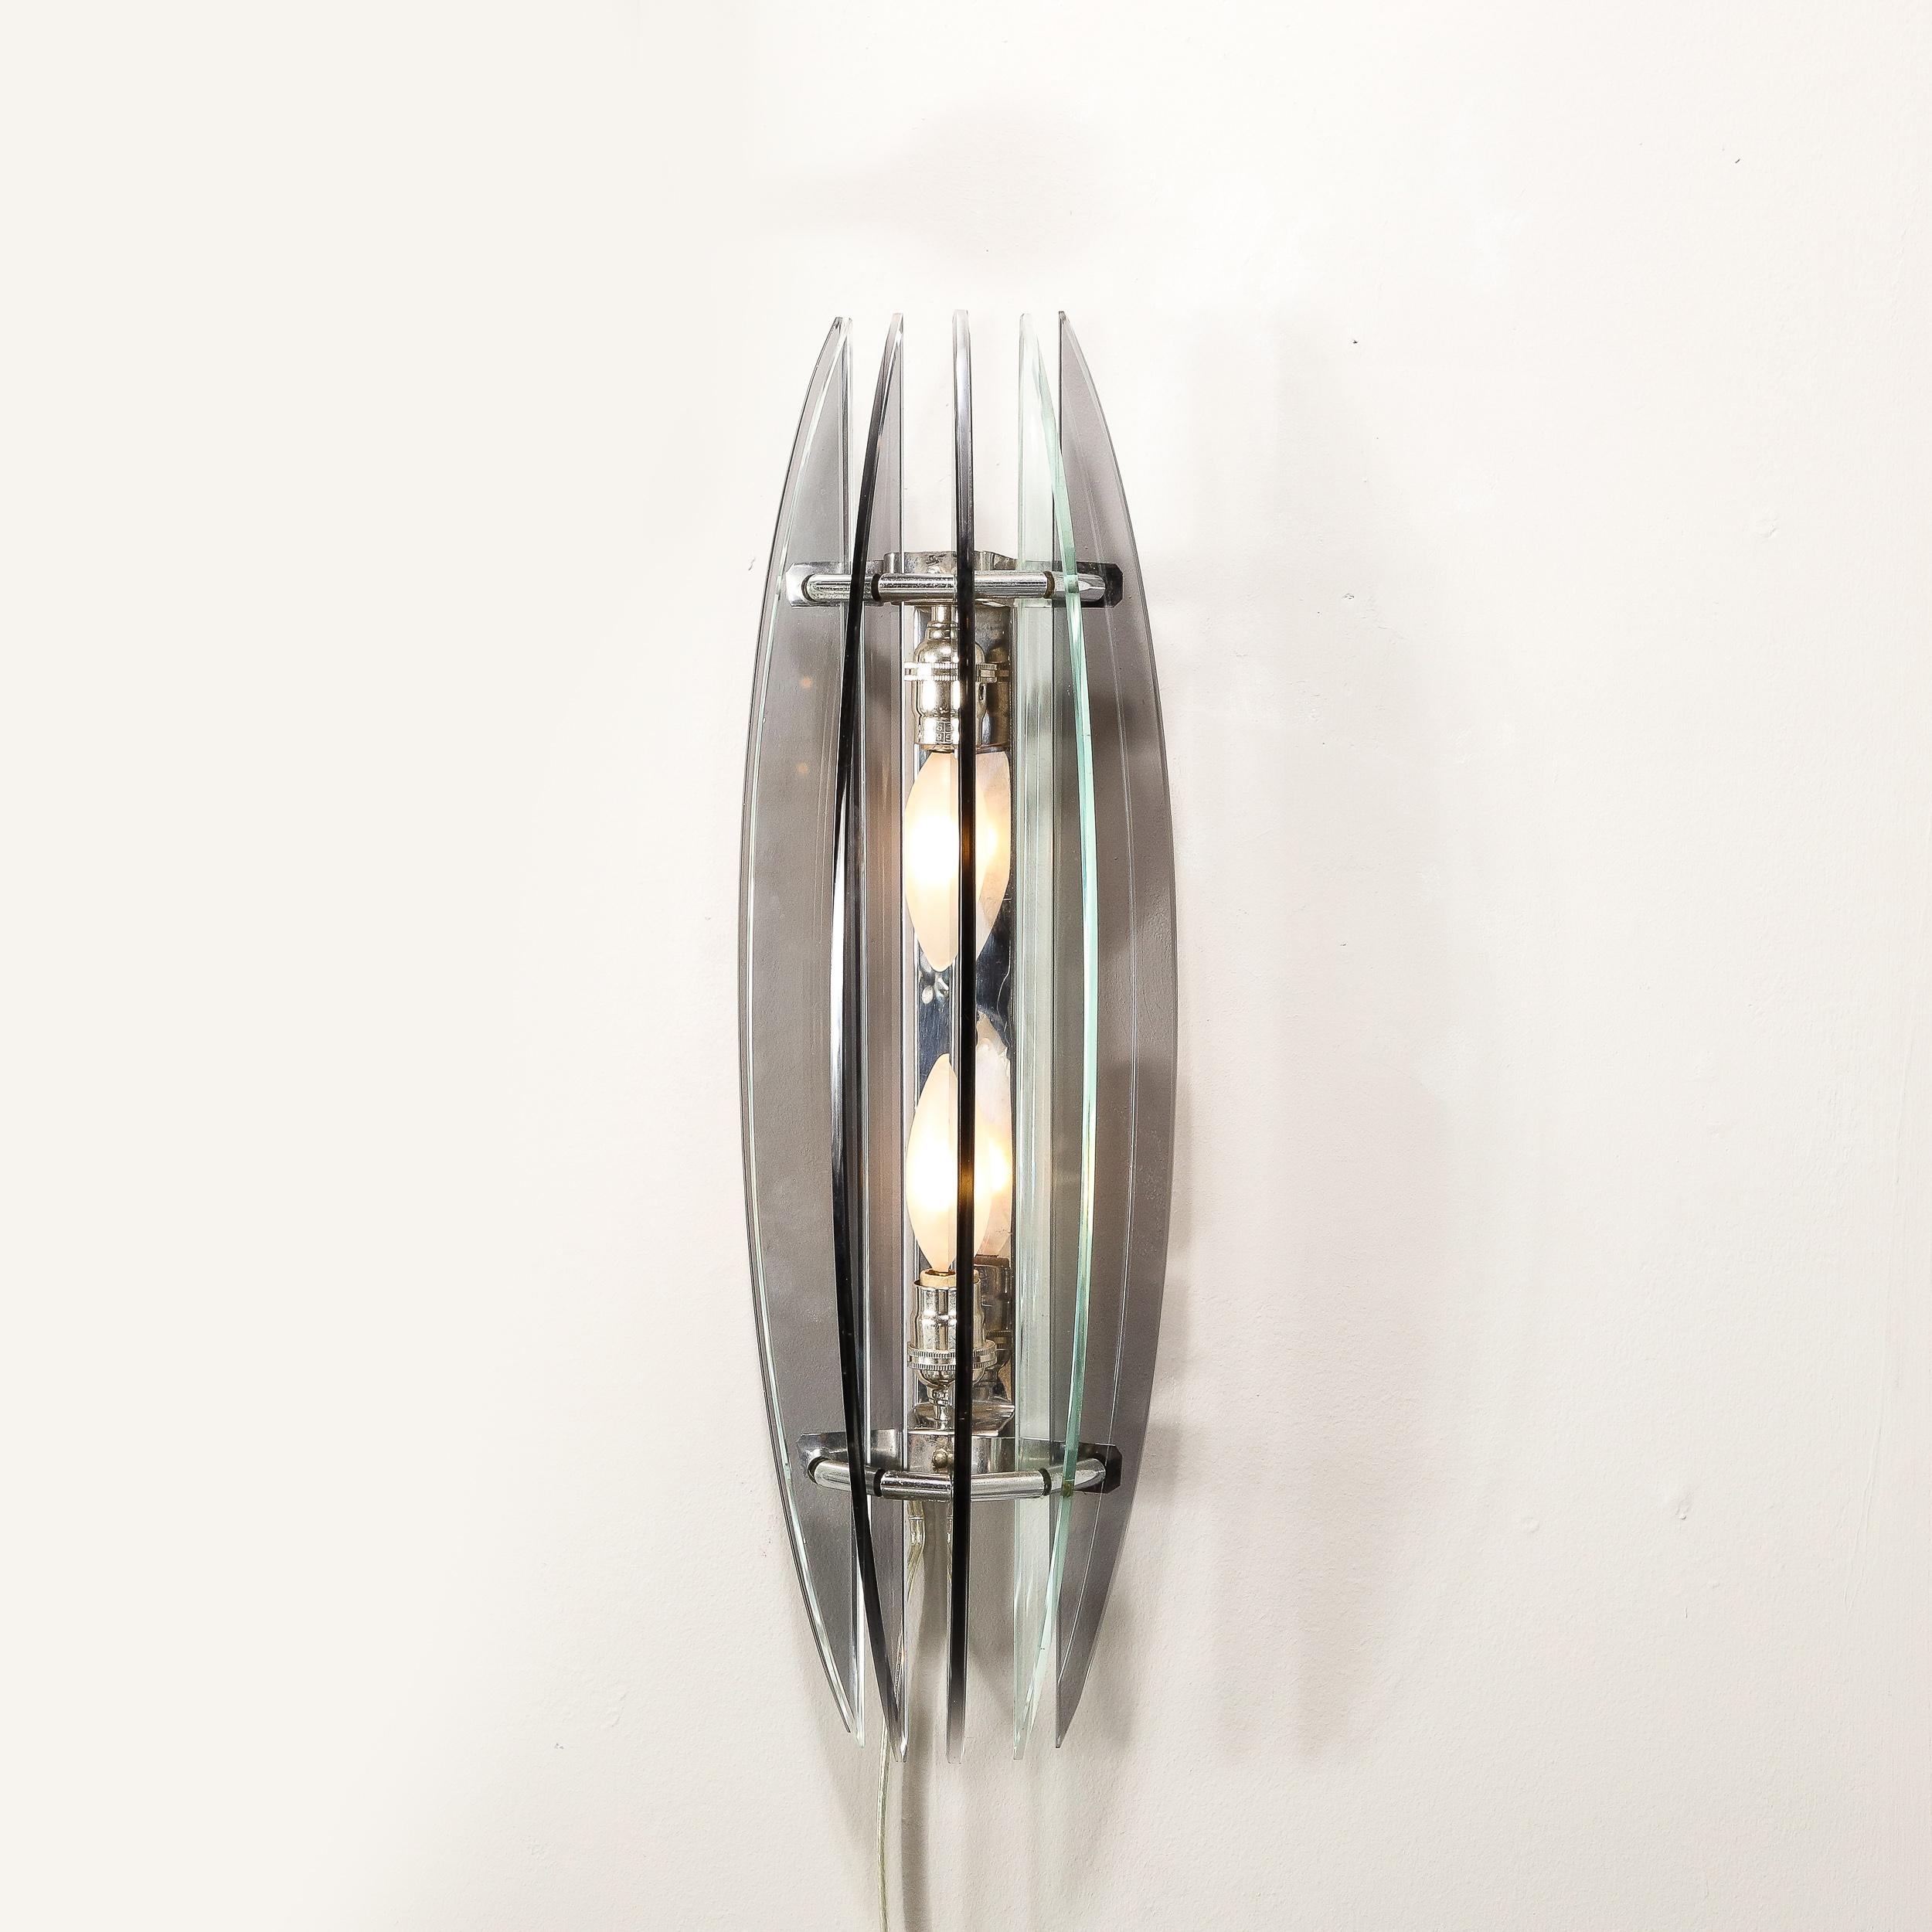 This pair of Mid-Century Modernist Smoked Glass Sconces are fabricated by VECA, originating from Italy, Circa 1970. Composed in five demilune curved smoked glass elements unified by a curved cylindrical frame, their verticality and sleek curvature